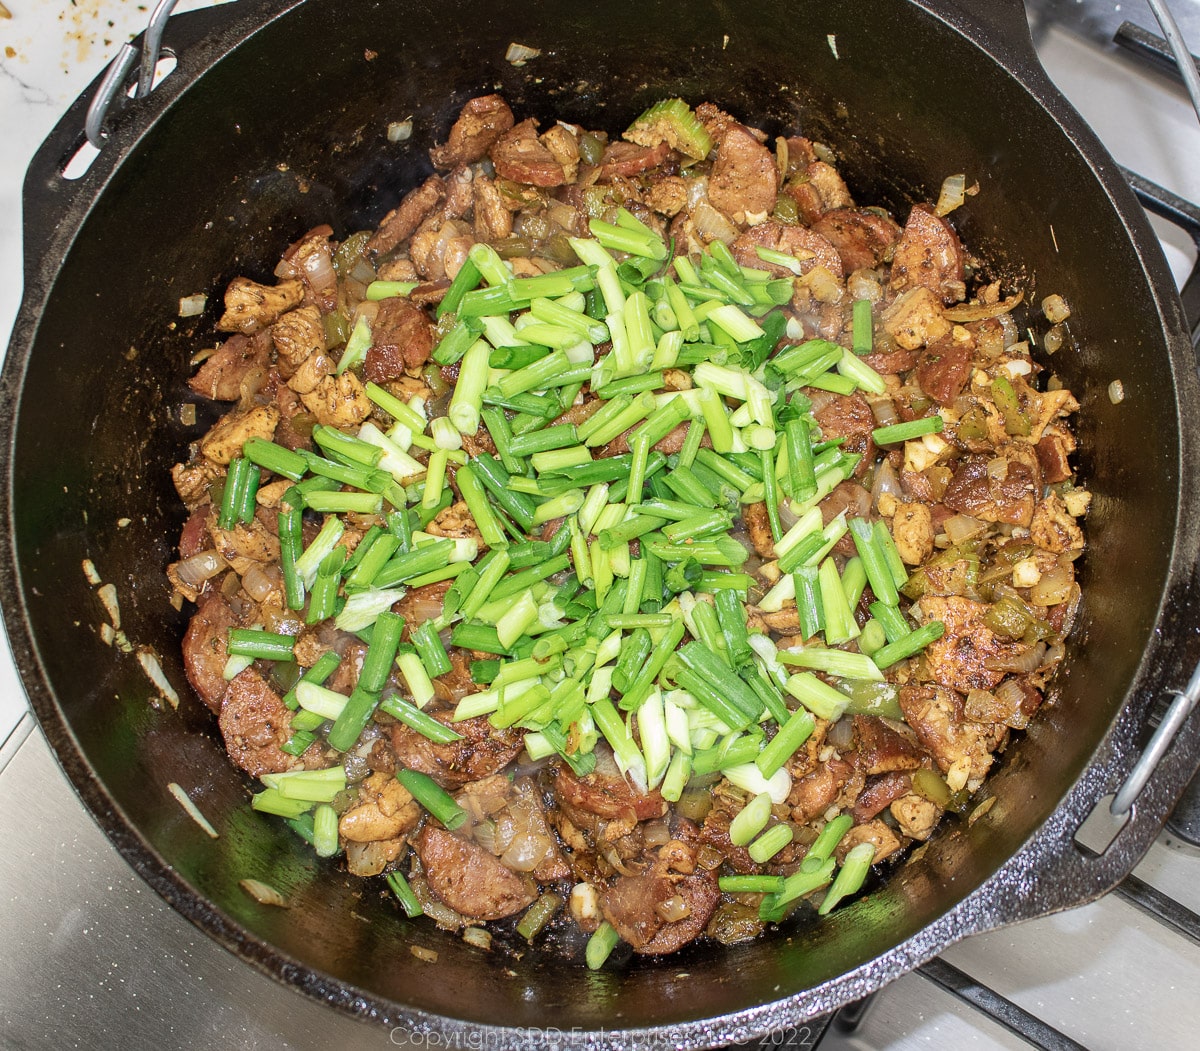 sliced green onions added to vegetables and meats in a Dutch oven